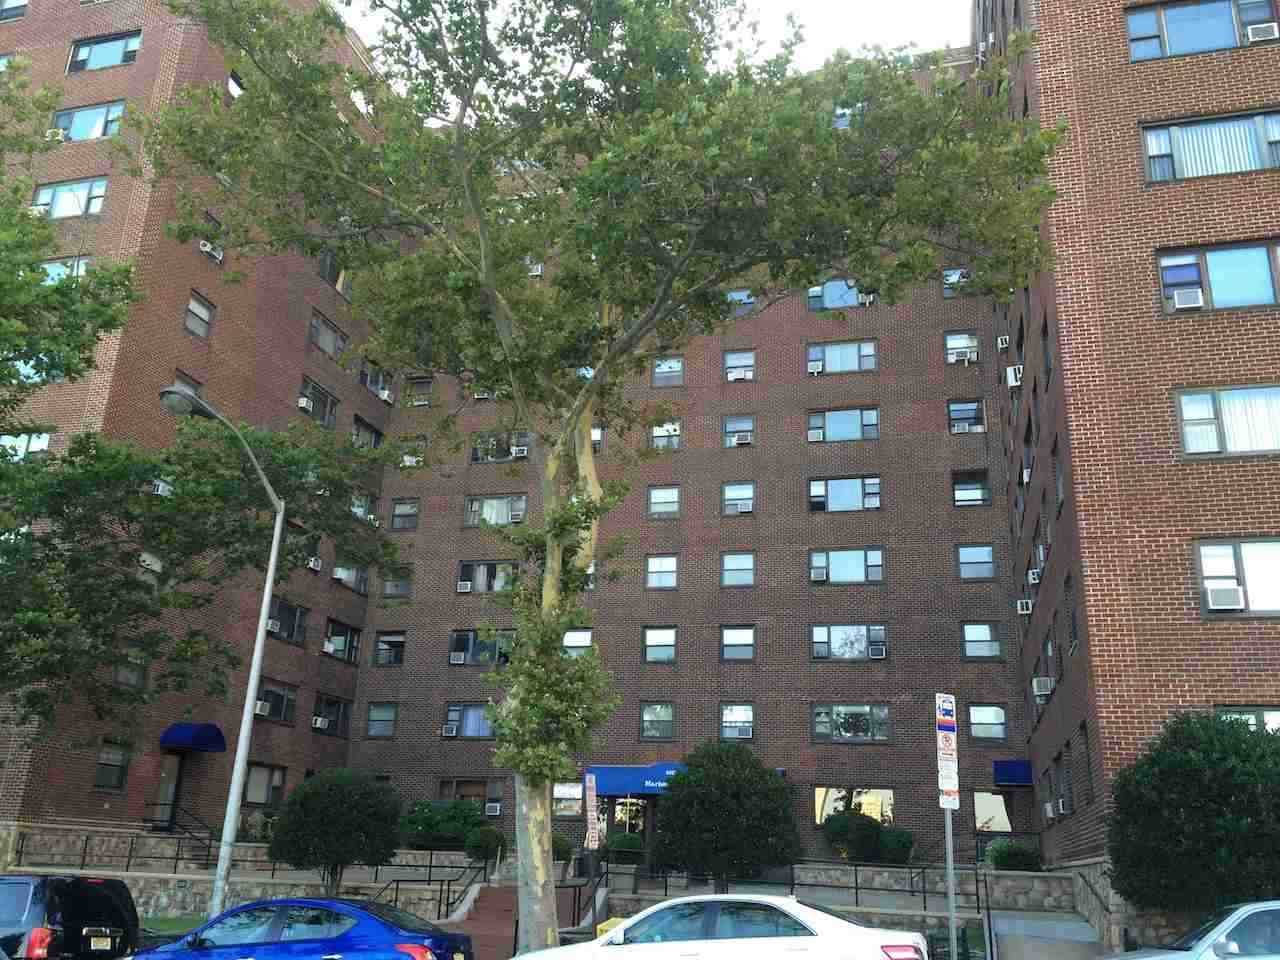 Sold as package of 10 units - 7 one bedrooms / 3 two bedroom condos / 2 parking spaces - all protected tenants